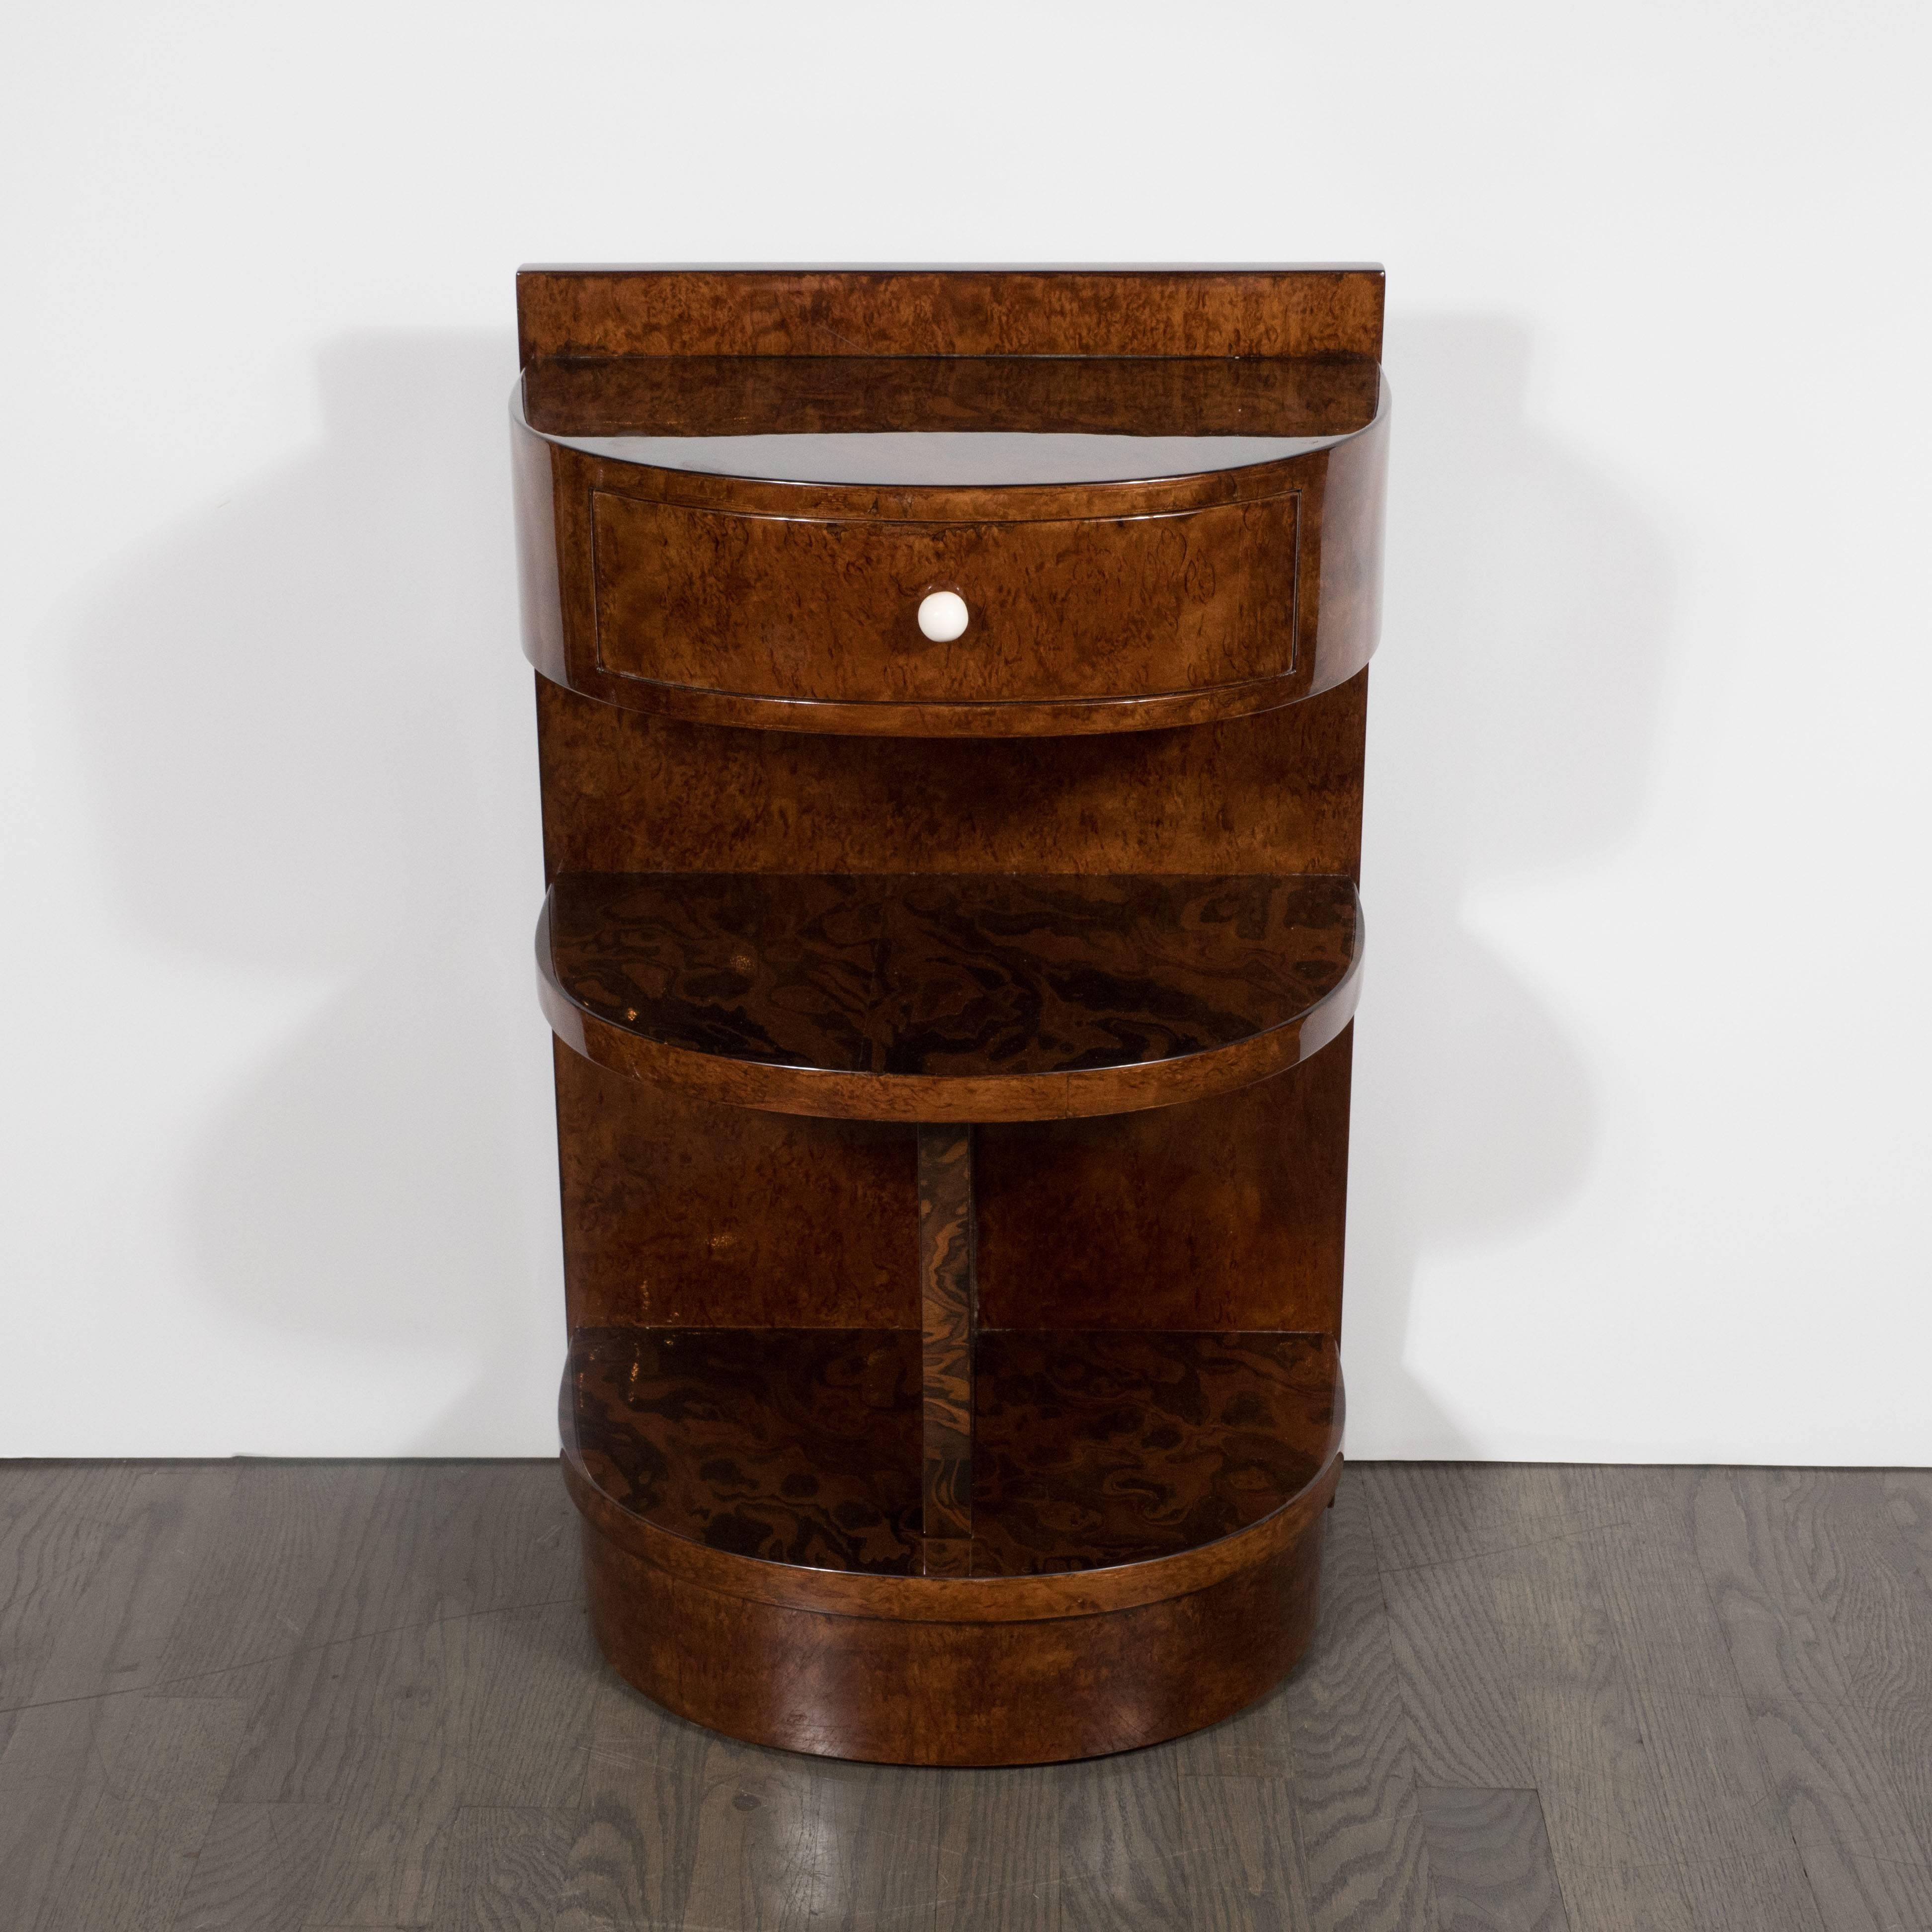 This pair of Demilune nightstands were realized from burled exotic wood and book-matched Carpathian Elm in France, circa 1930 at the height of Art Deco. They represent Fine examples of the time and place. They feature three shelves and a drawer,